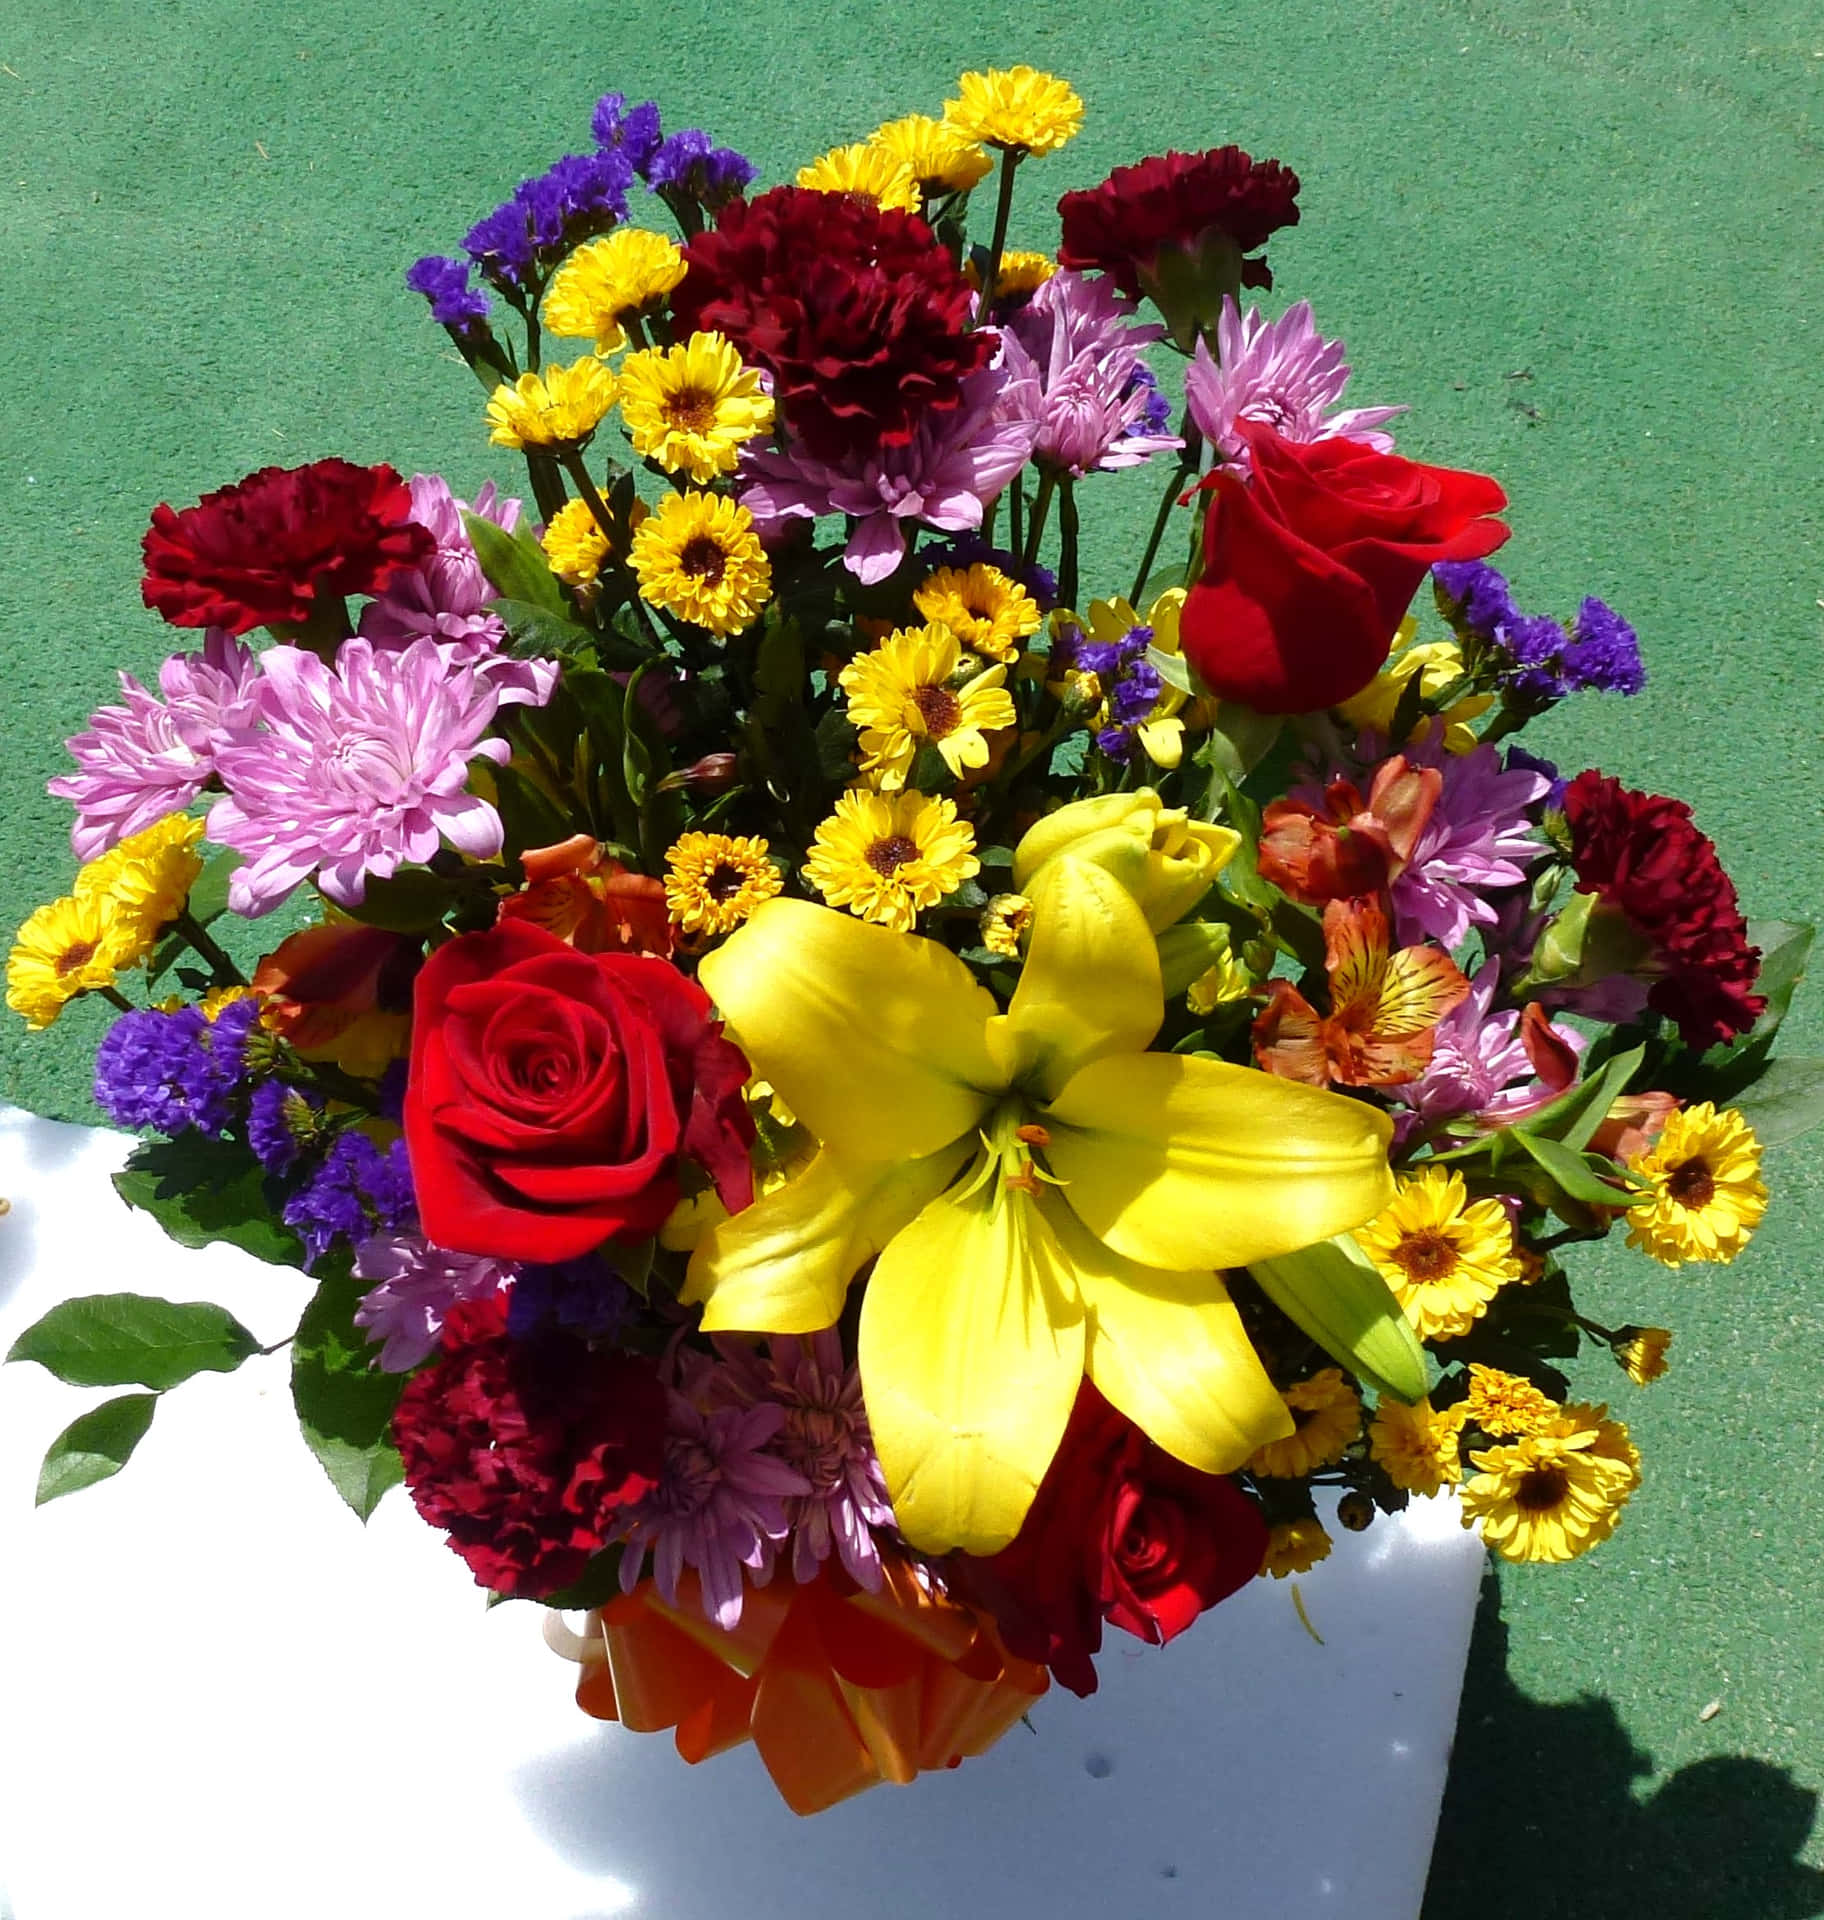 A beautiful and vibrant bouquet of flowers.